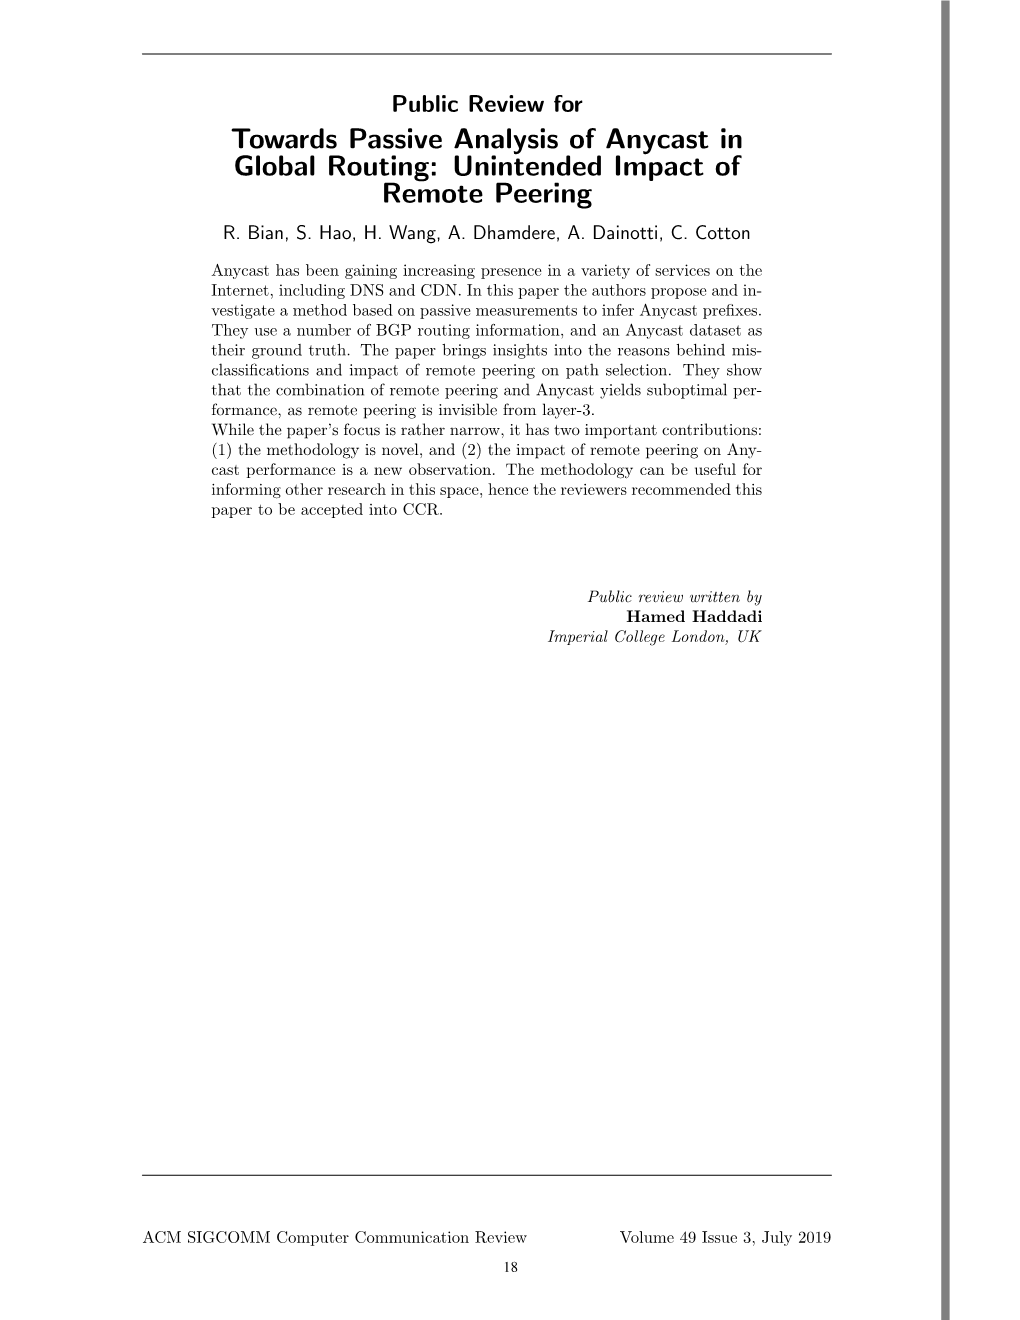 Towards Passive Analysis of Anycast in Global Routing: Unintended Impact of Remote Peering R